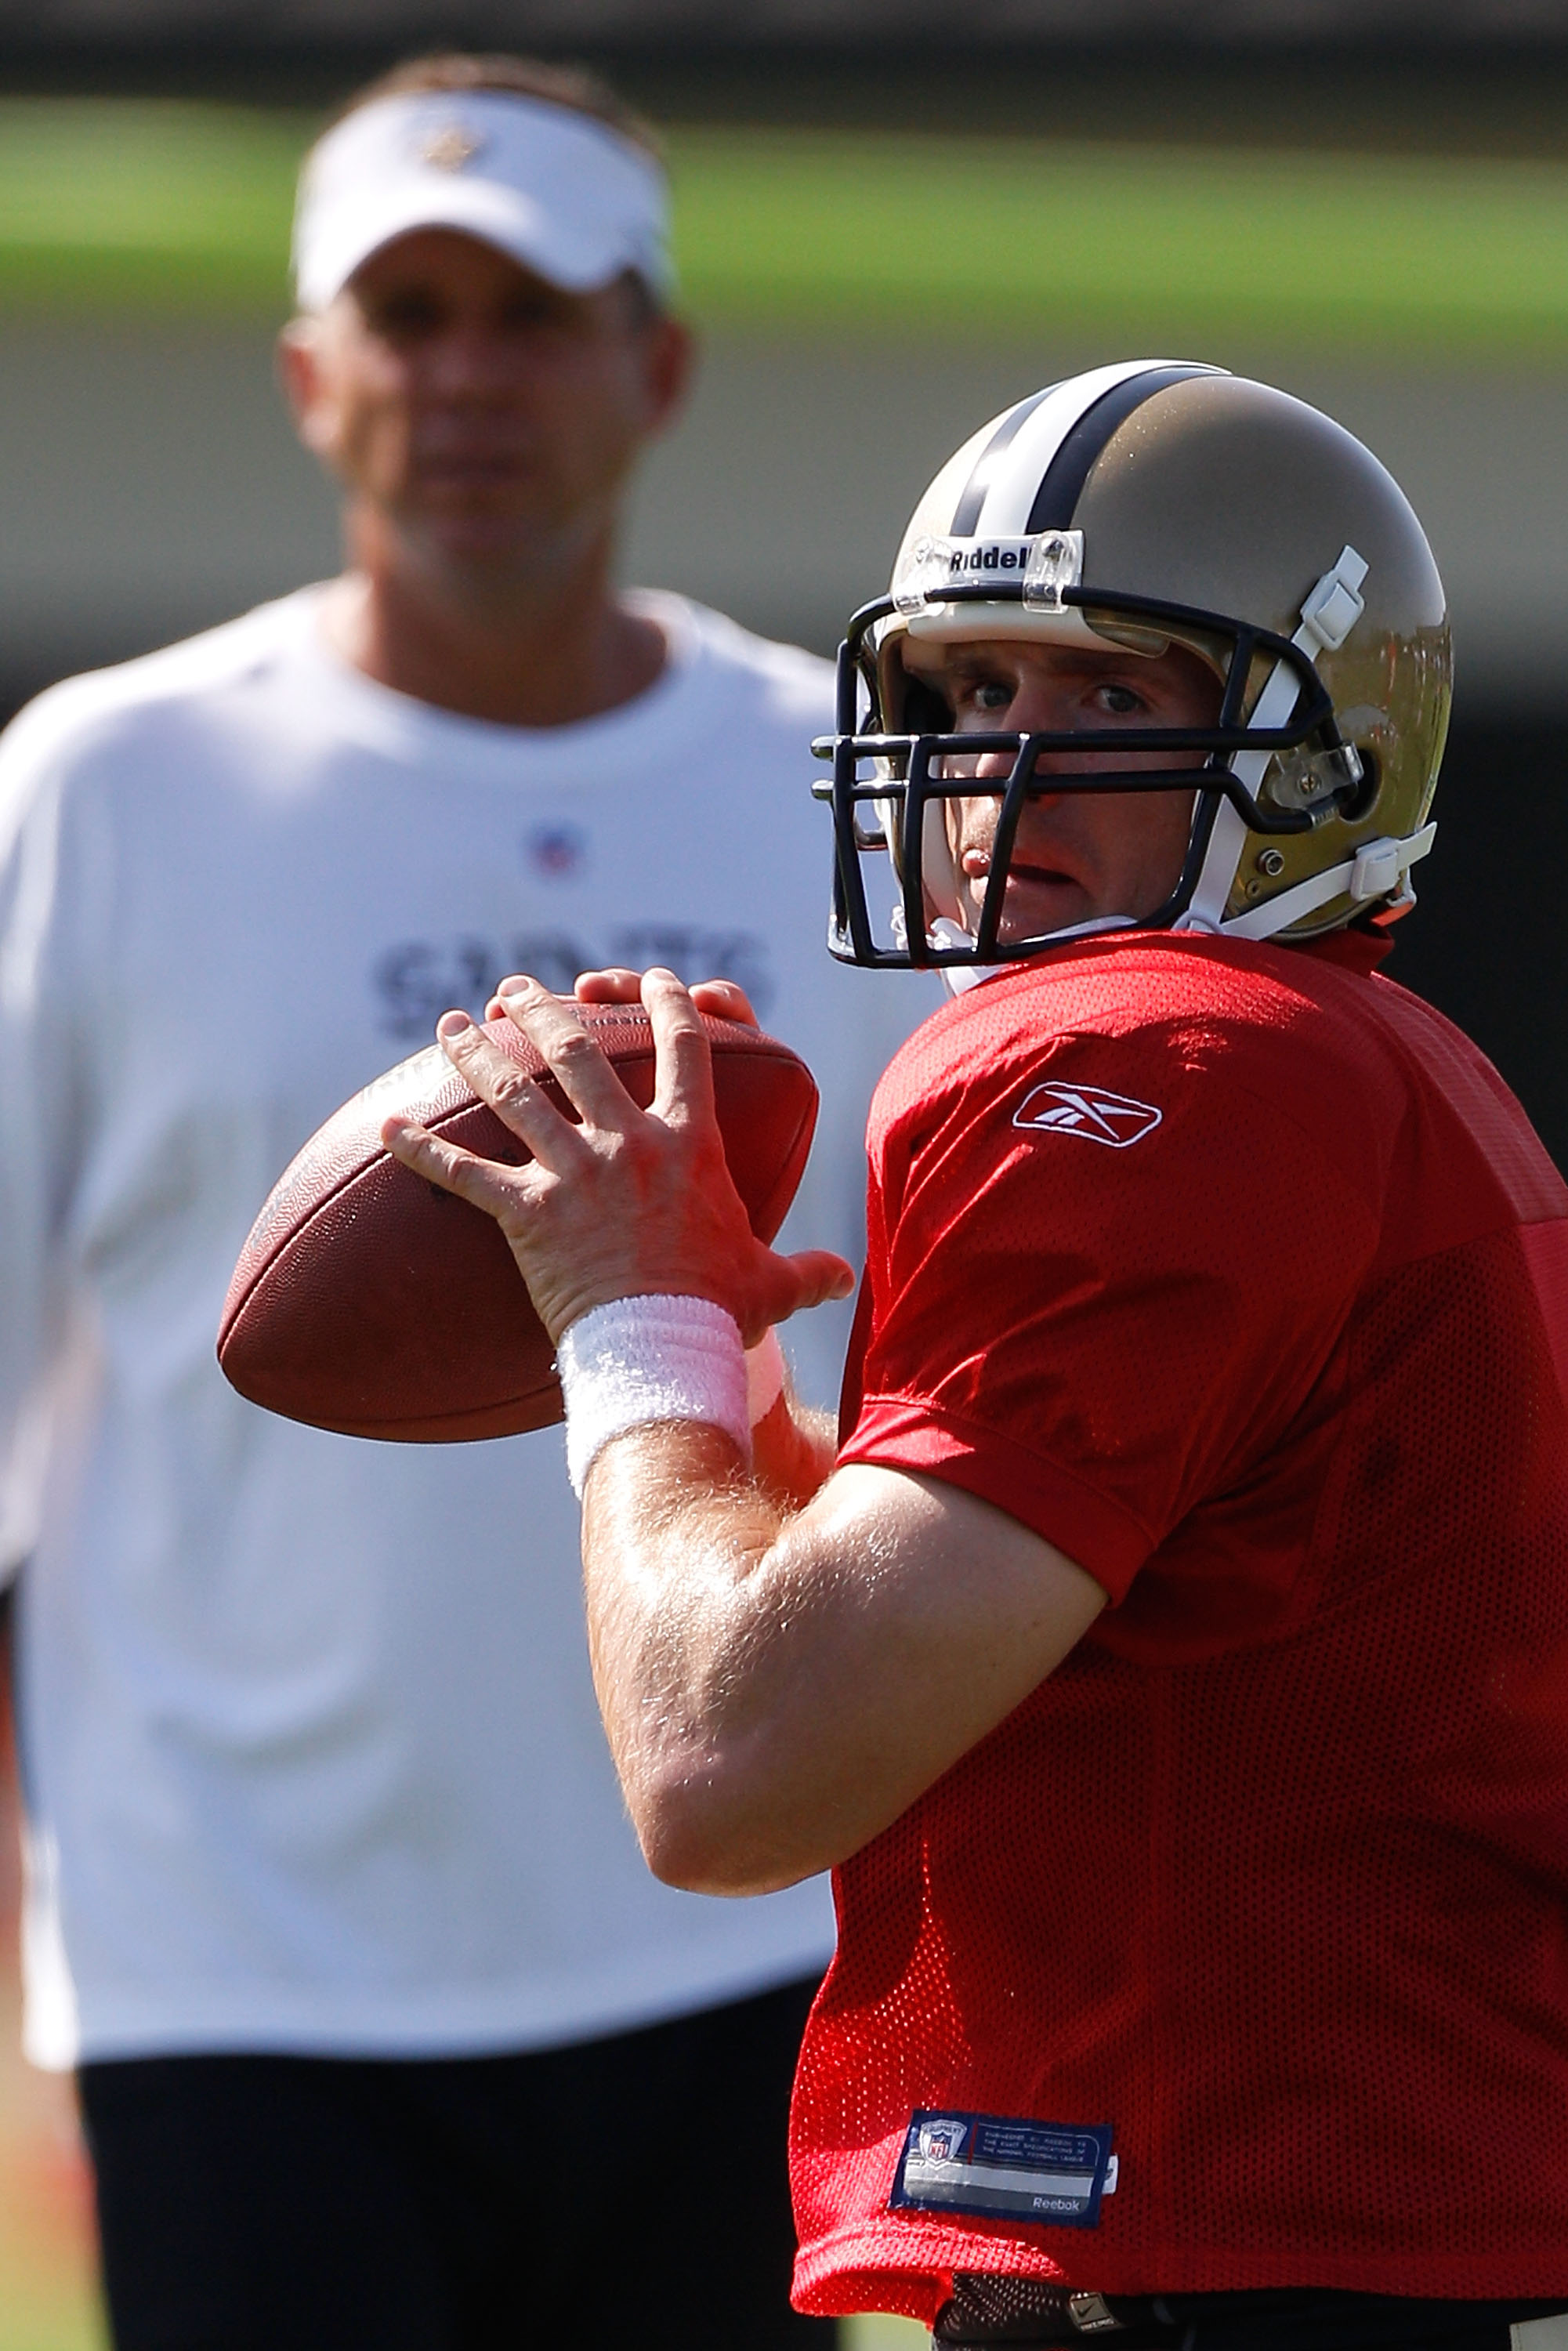 METAIRIE, LA - JULY 30:  Drew Brees #9 of the New Orleans Saints during training camp on July 30, 2010 in Metairie, Louisiana.  (Photo by Chris Graythen/Getty Images)